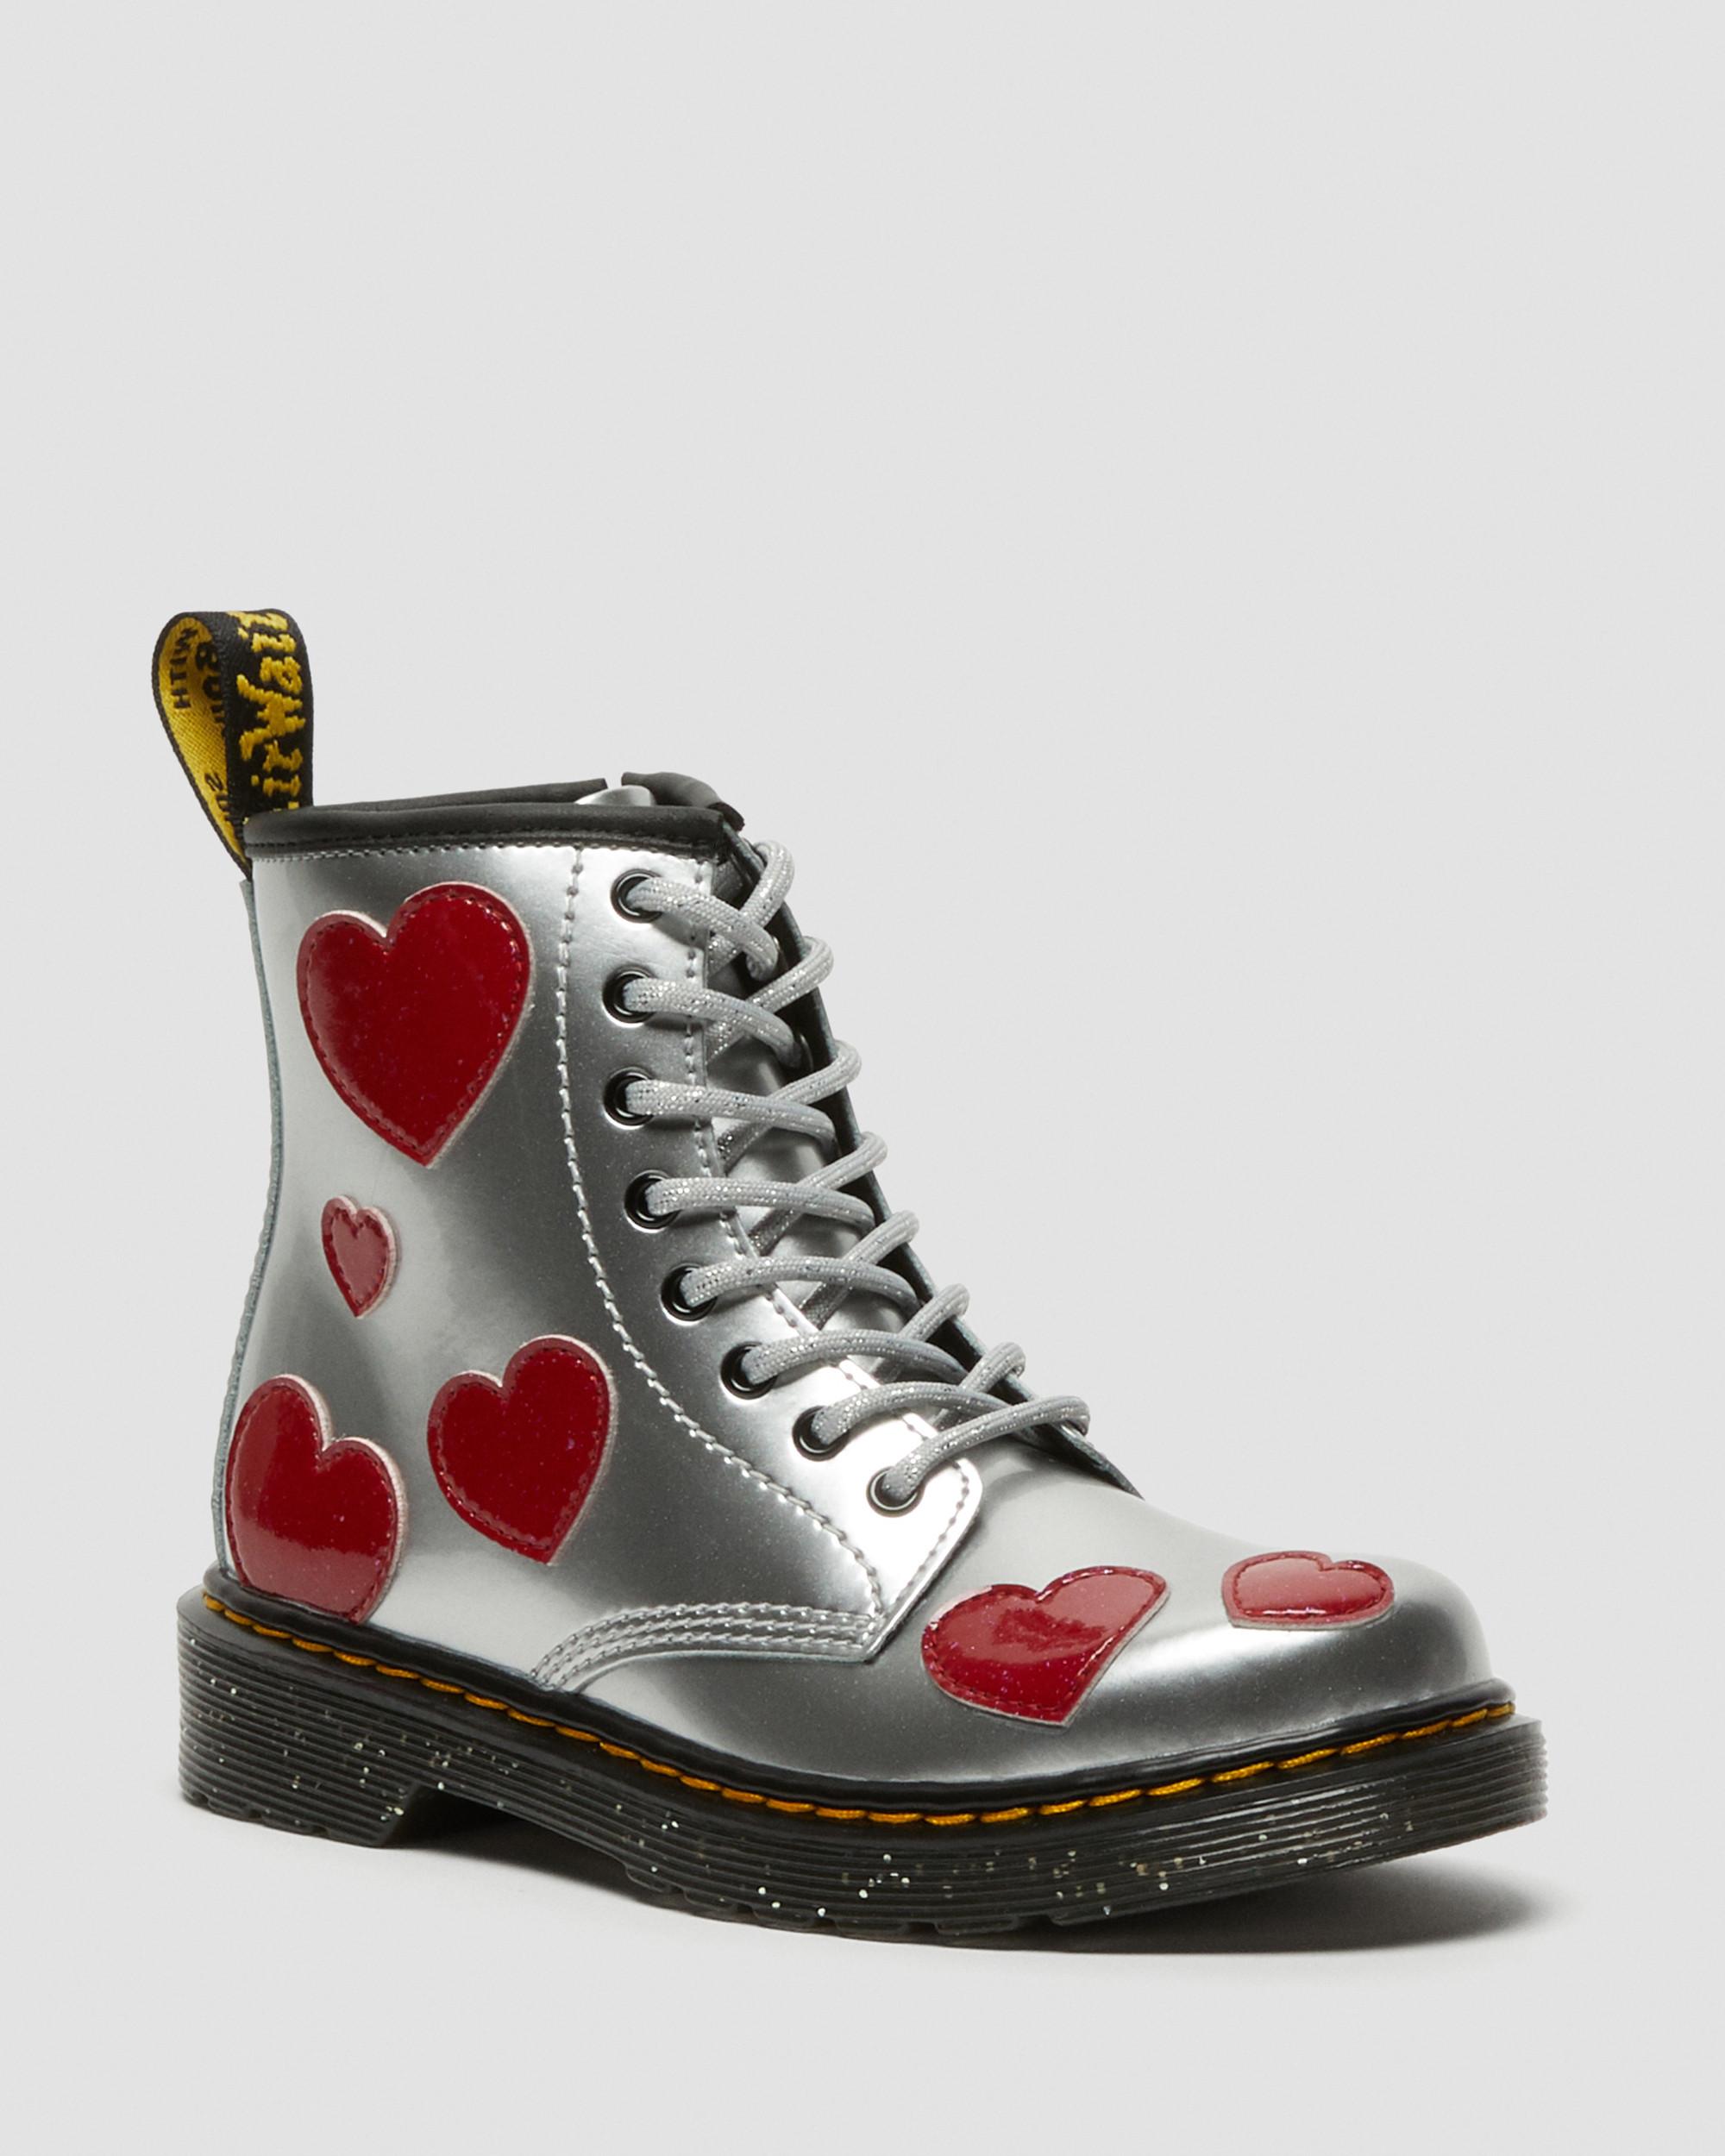 Junior 1460 Glitter Star Patent Lace Up Boots in Metallic | Dr. Martens